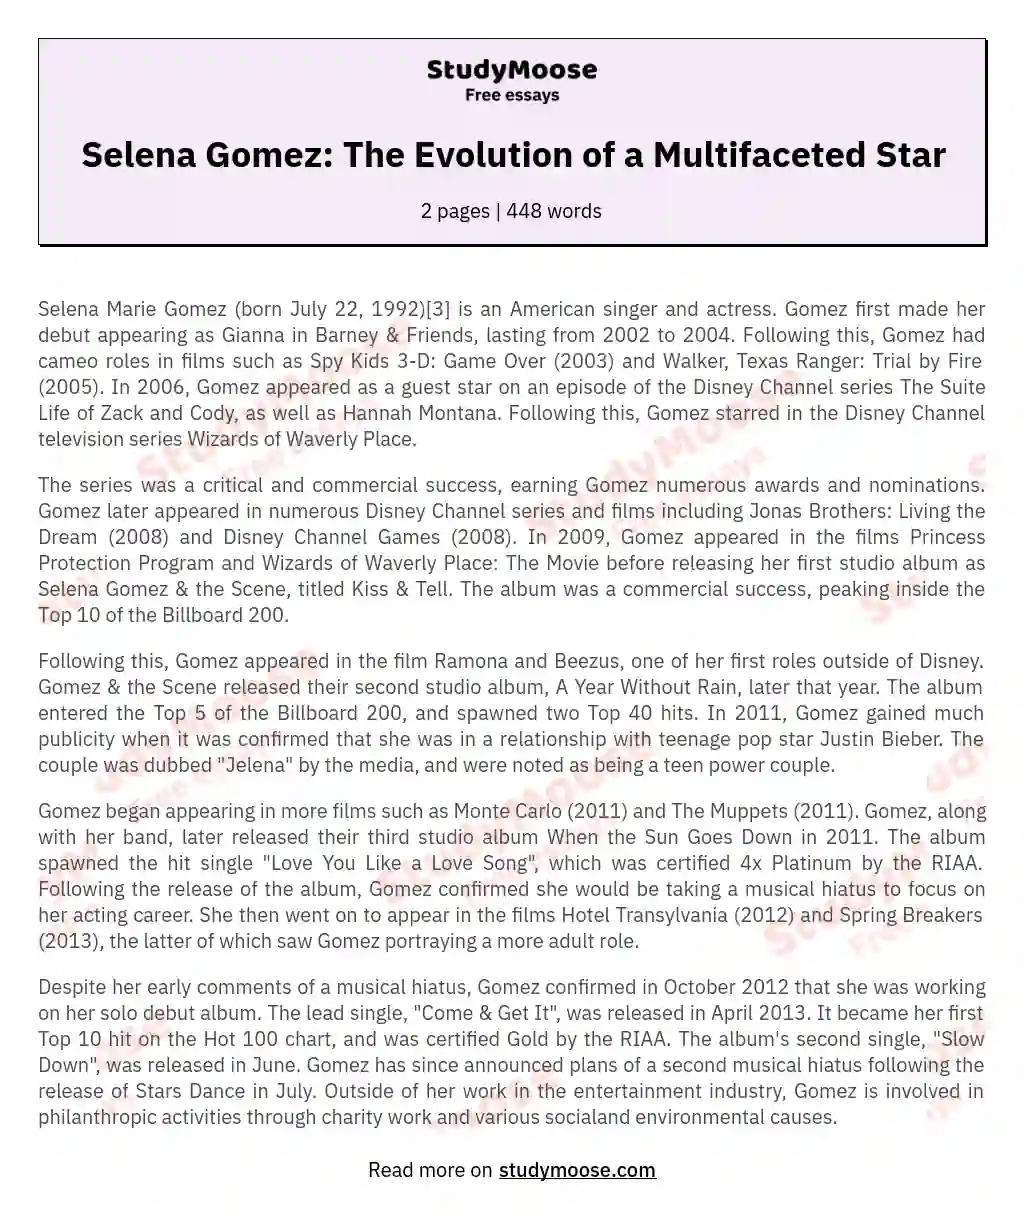 Selena Gomez: The Evolution of a Multifaceted Star essay